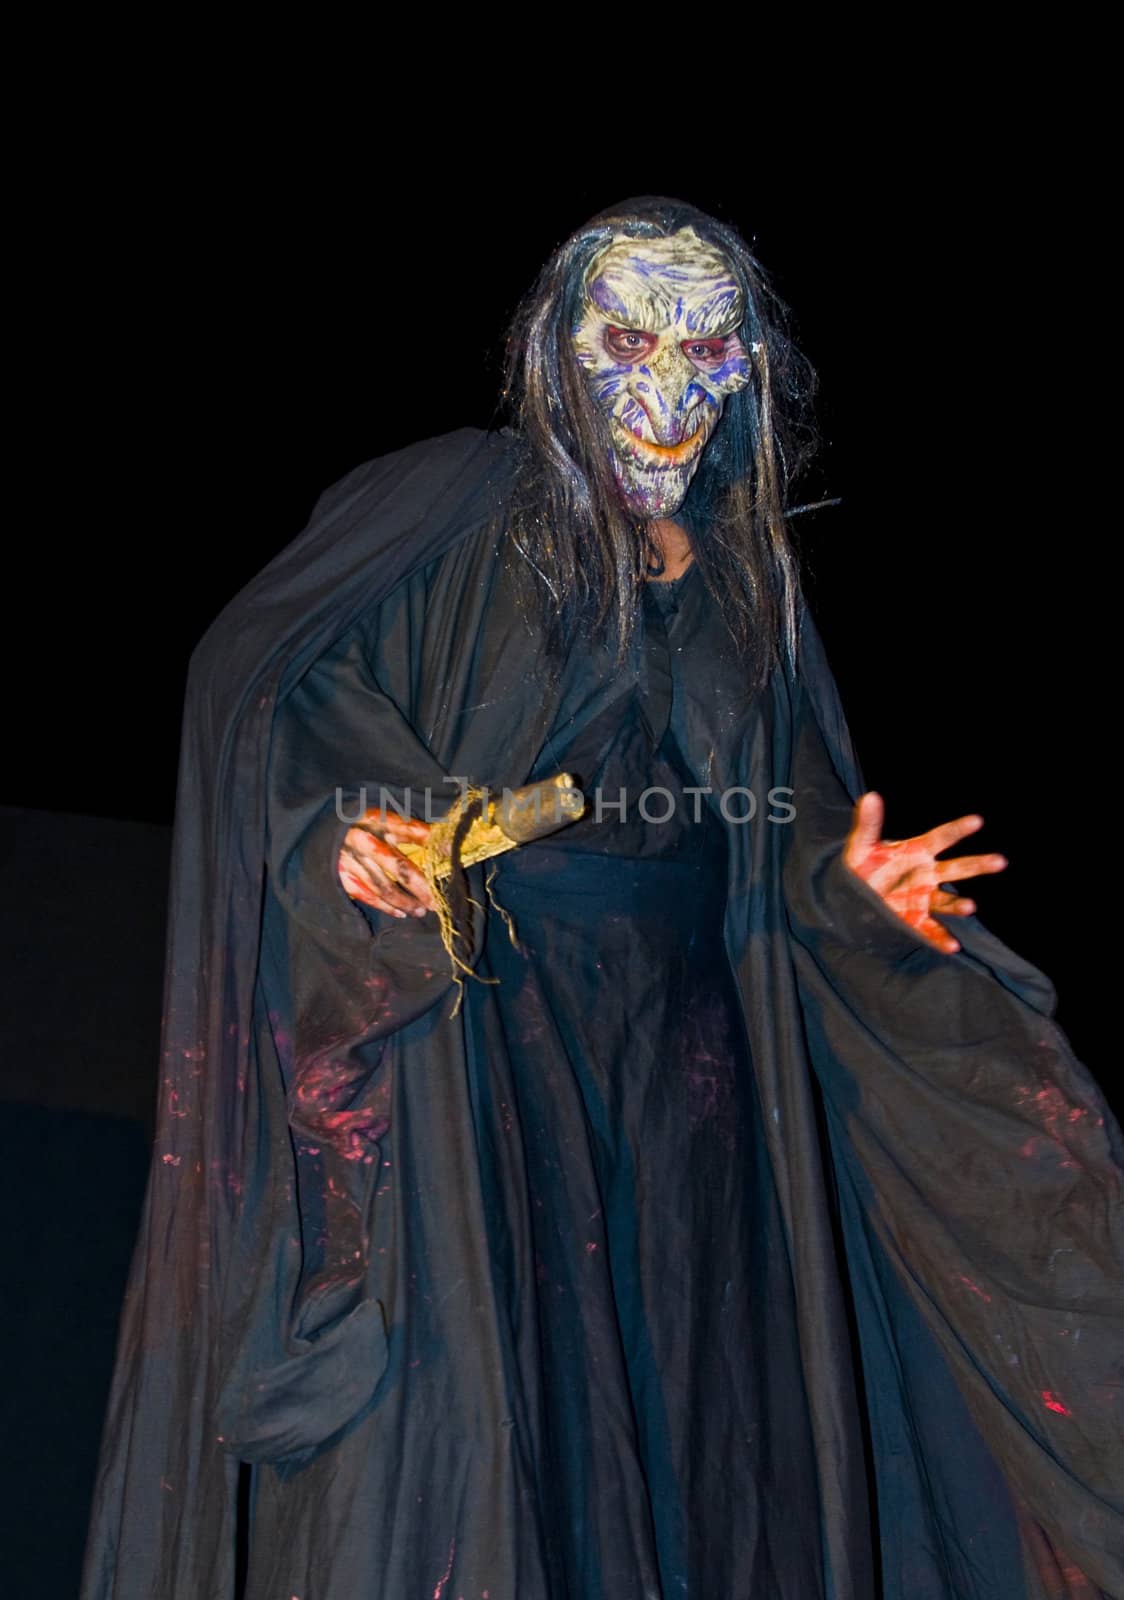 ACCO , ISRAEL - OCT 17 : An unidentified actor perform in the annual "Acco festival of alternative theatre"  take place in the old city of Acco , Israel on October 17 2011 